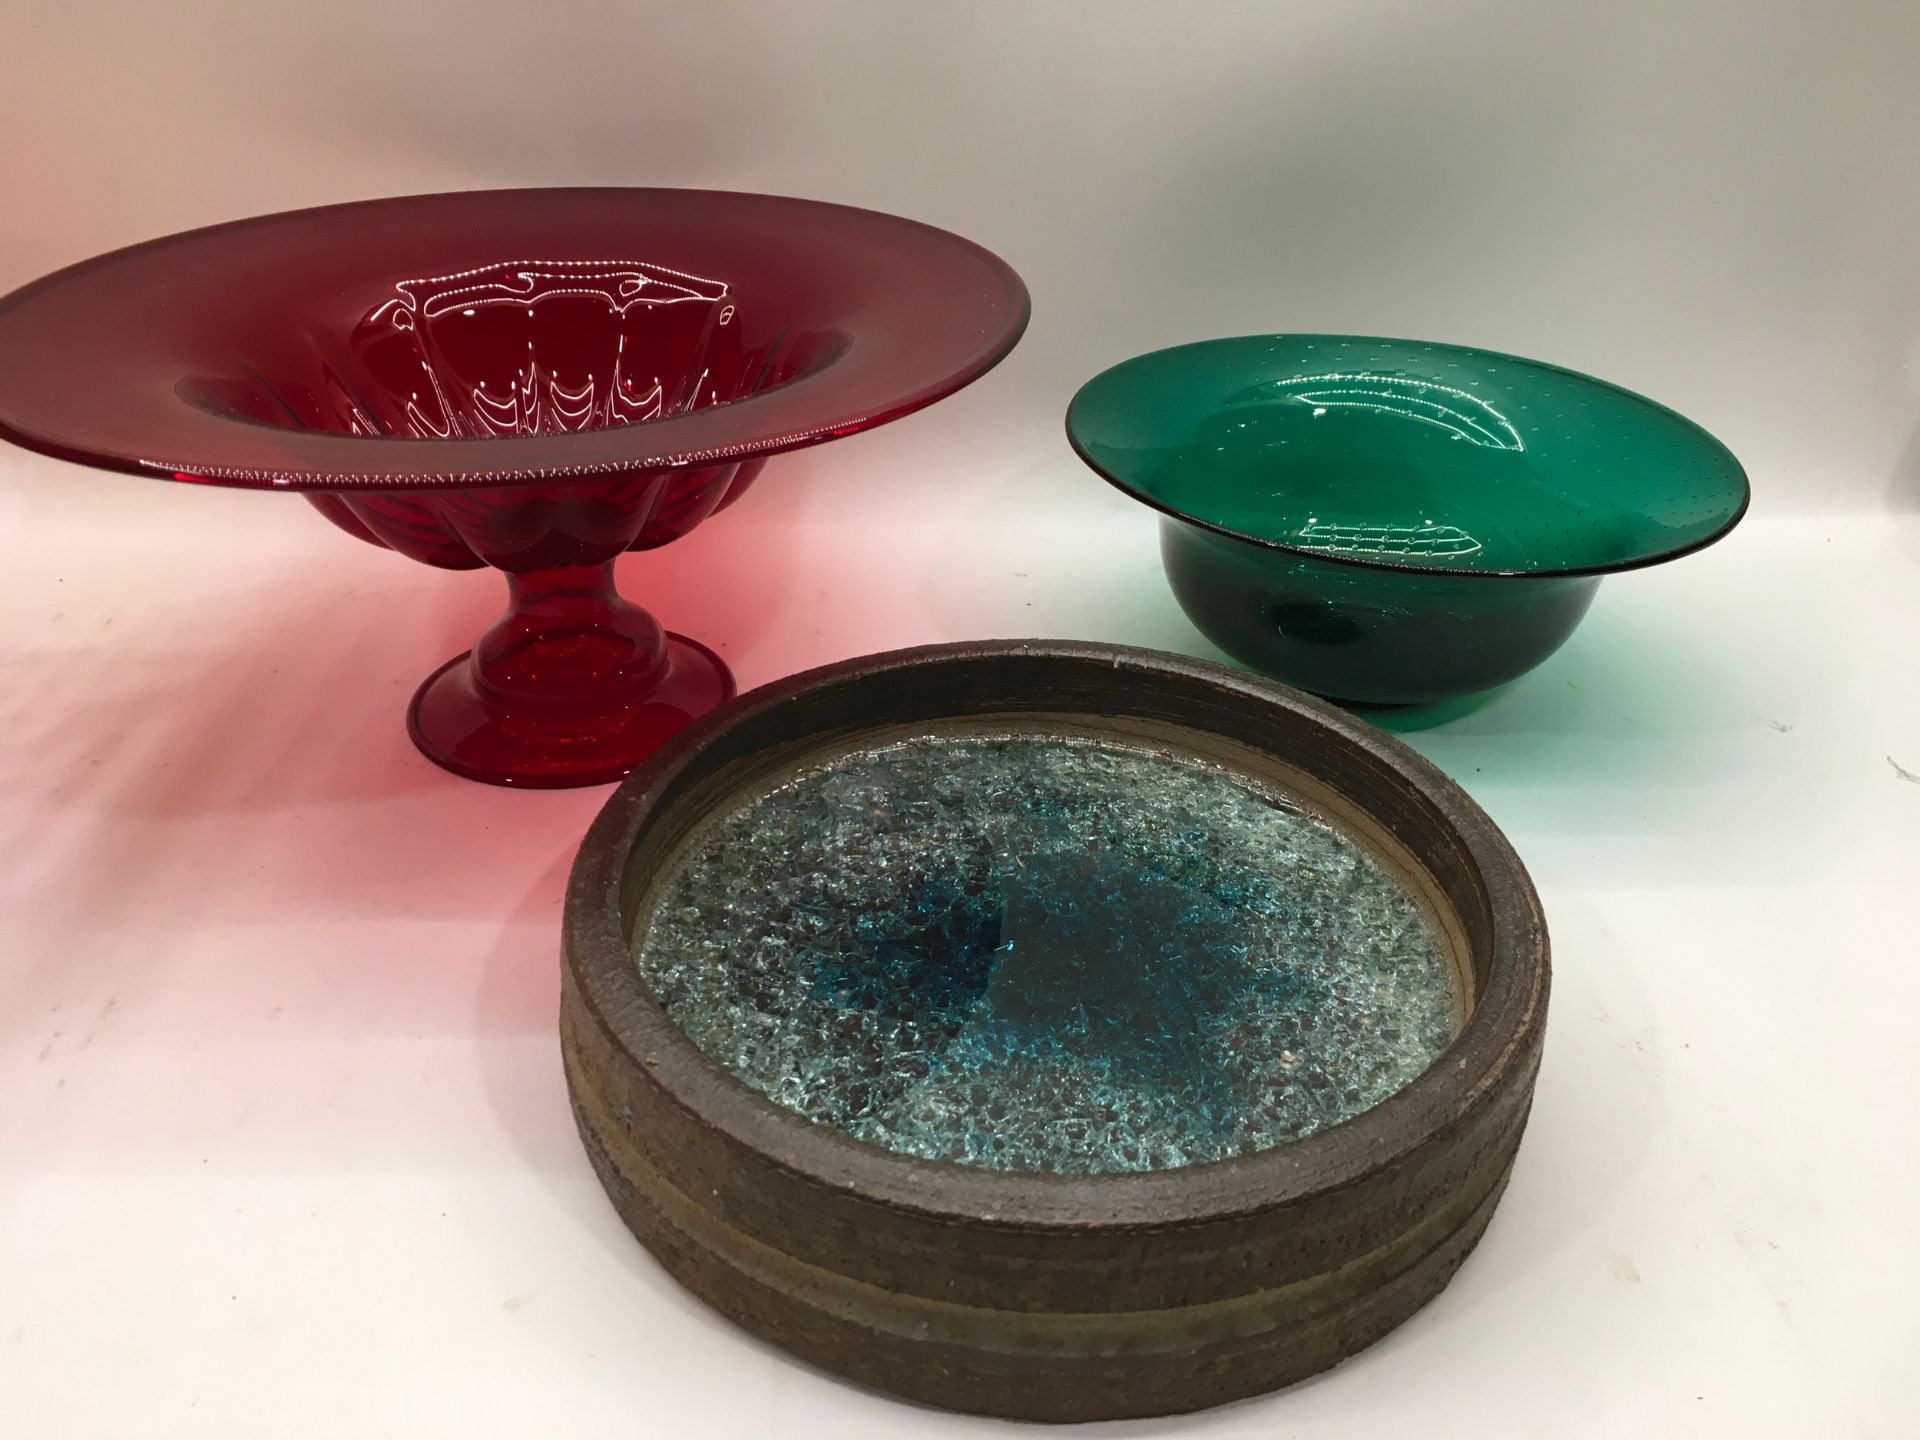 A cranberry glass centre piece together with a green glass bowl and one other.